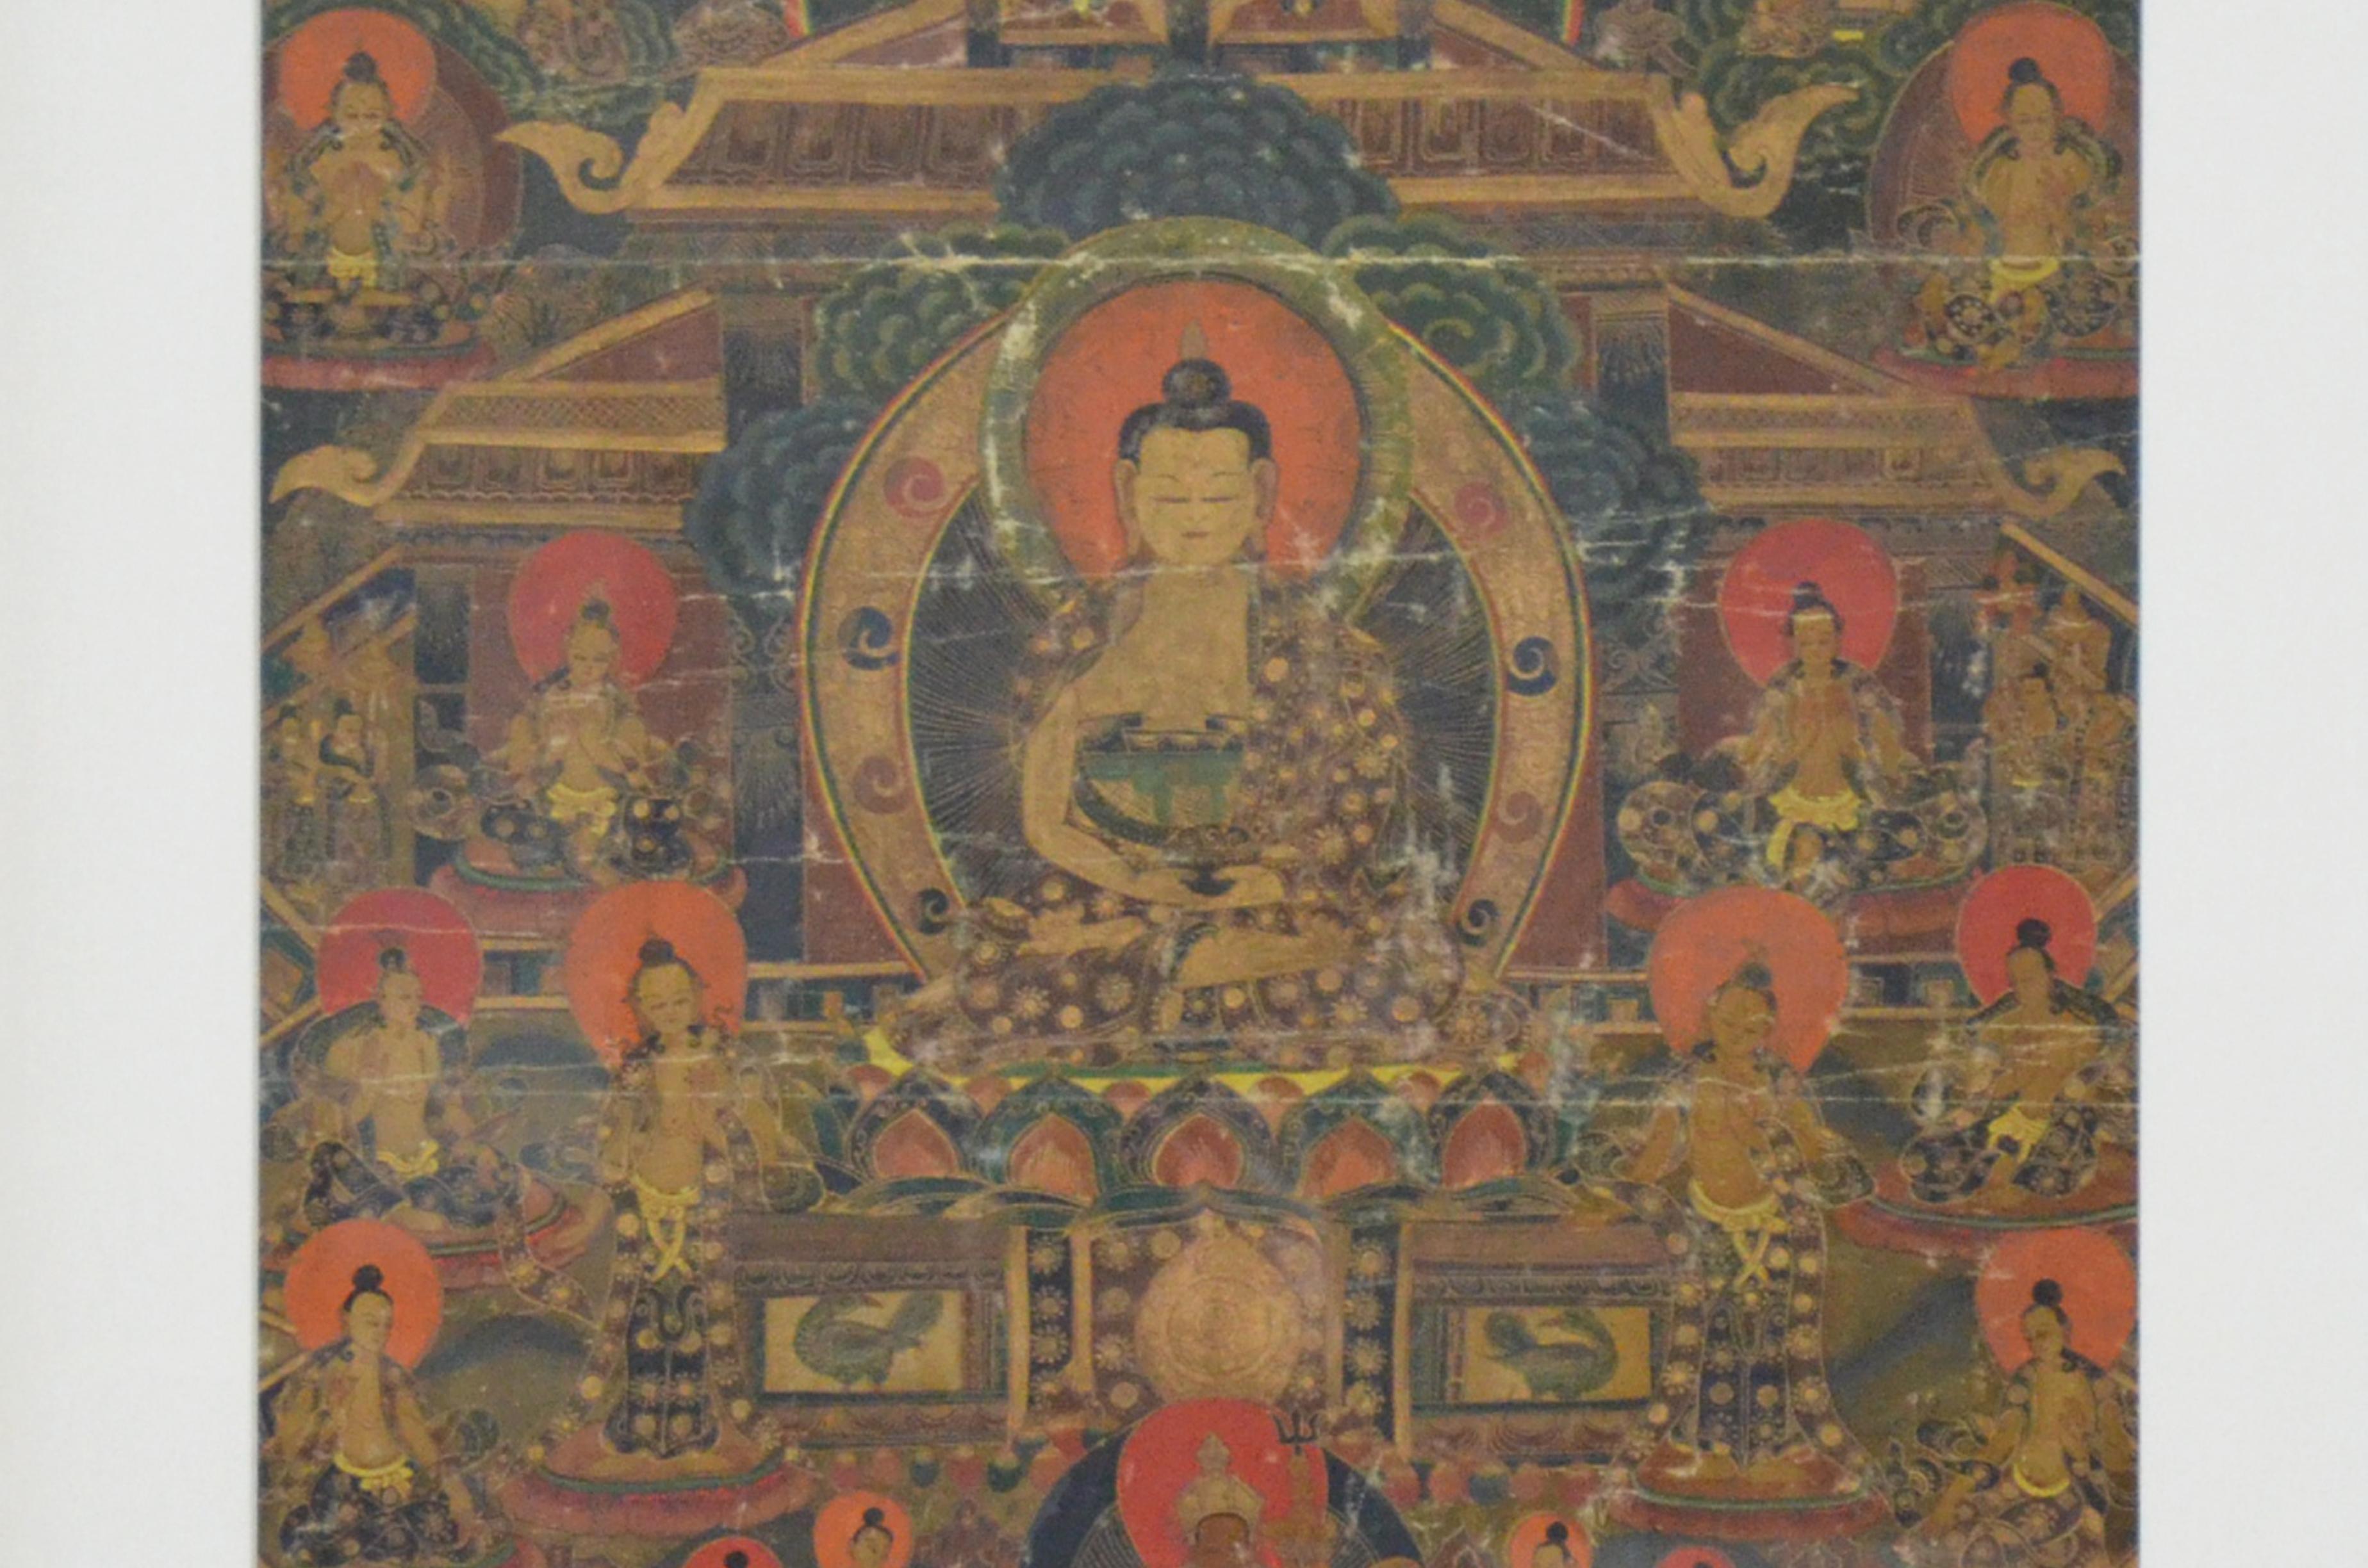 A vintage Tibetan hand-painted Thangka painting on canvas depicting the Buddha and multiple deities, in dark brown beveled frame. Created in India during the mid 20th century, this painting on canvas, called a Thangka, showcases a multi-colored